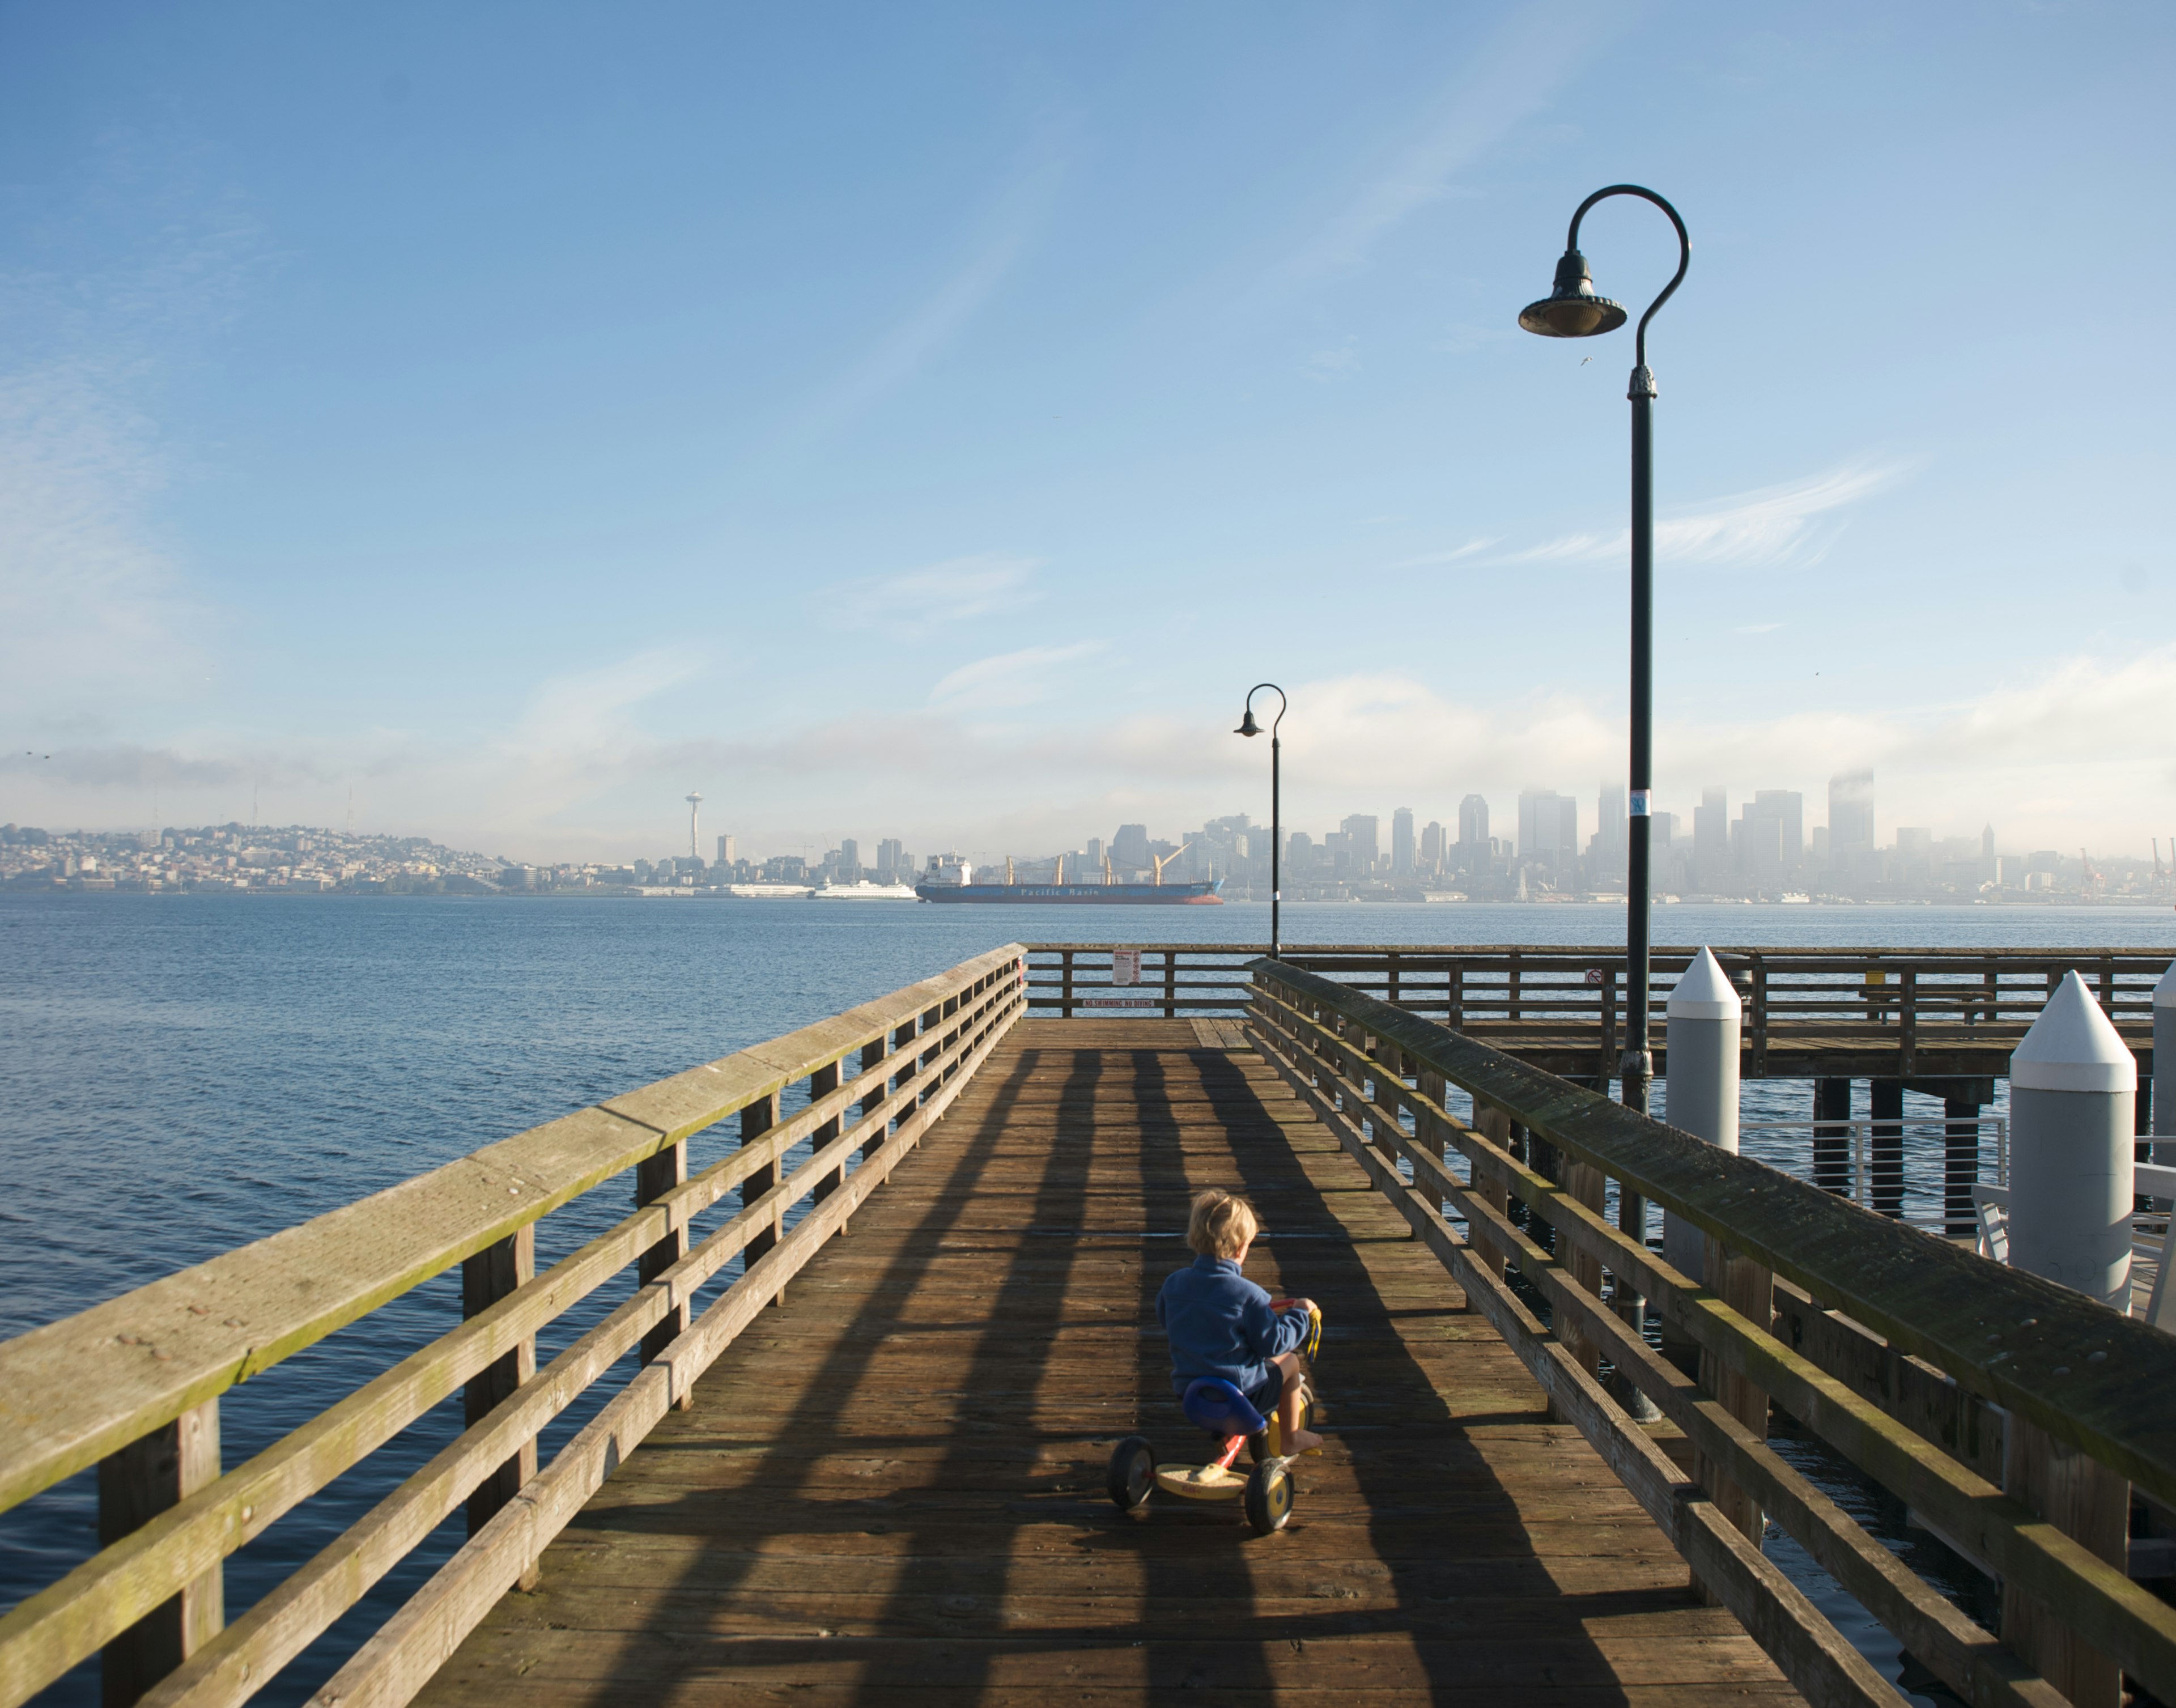 Boy rides tricycle on wooden dock looking out at Seattle skyline from Alki Beach.